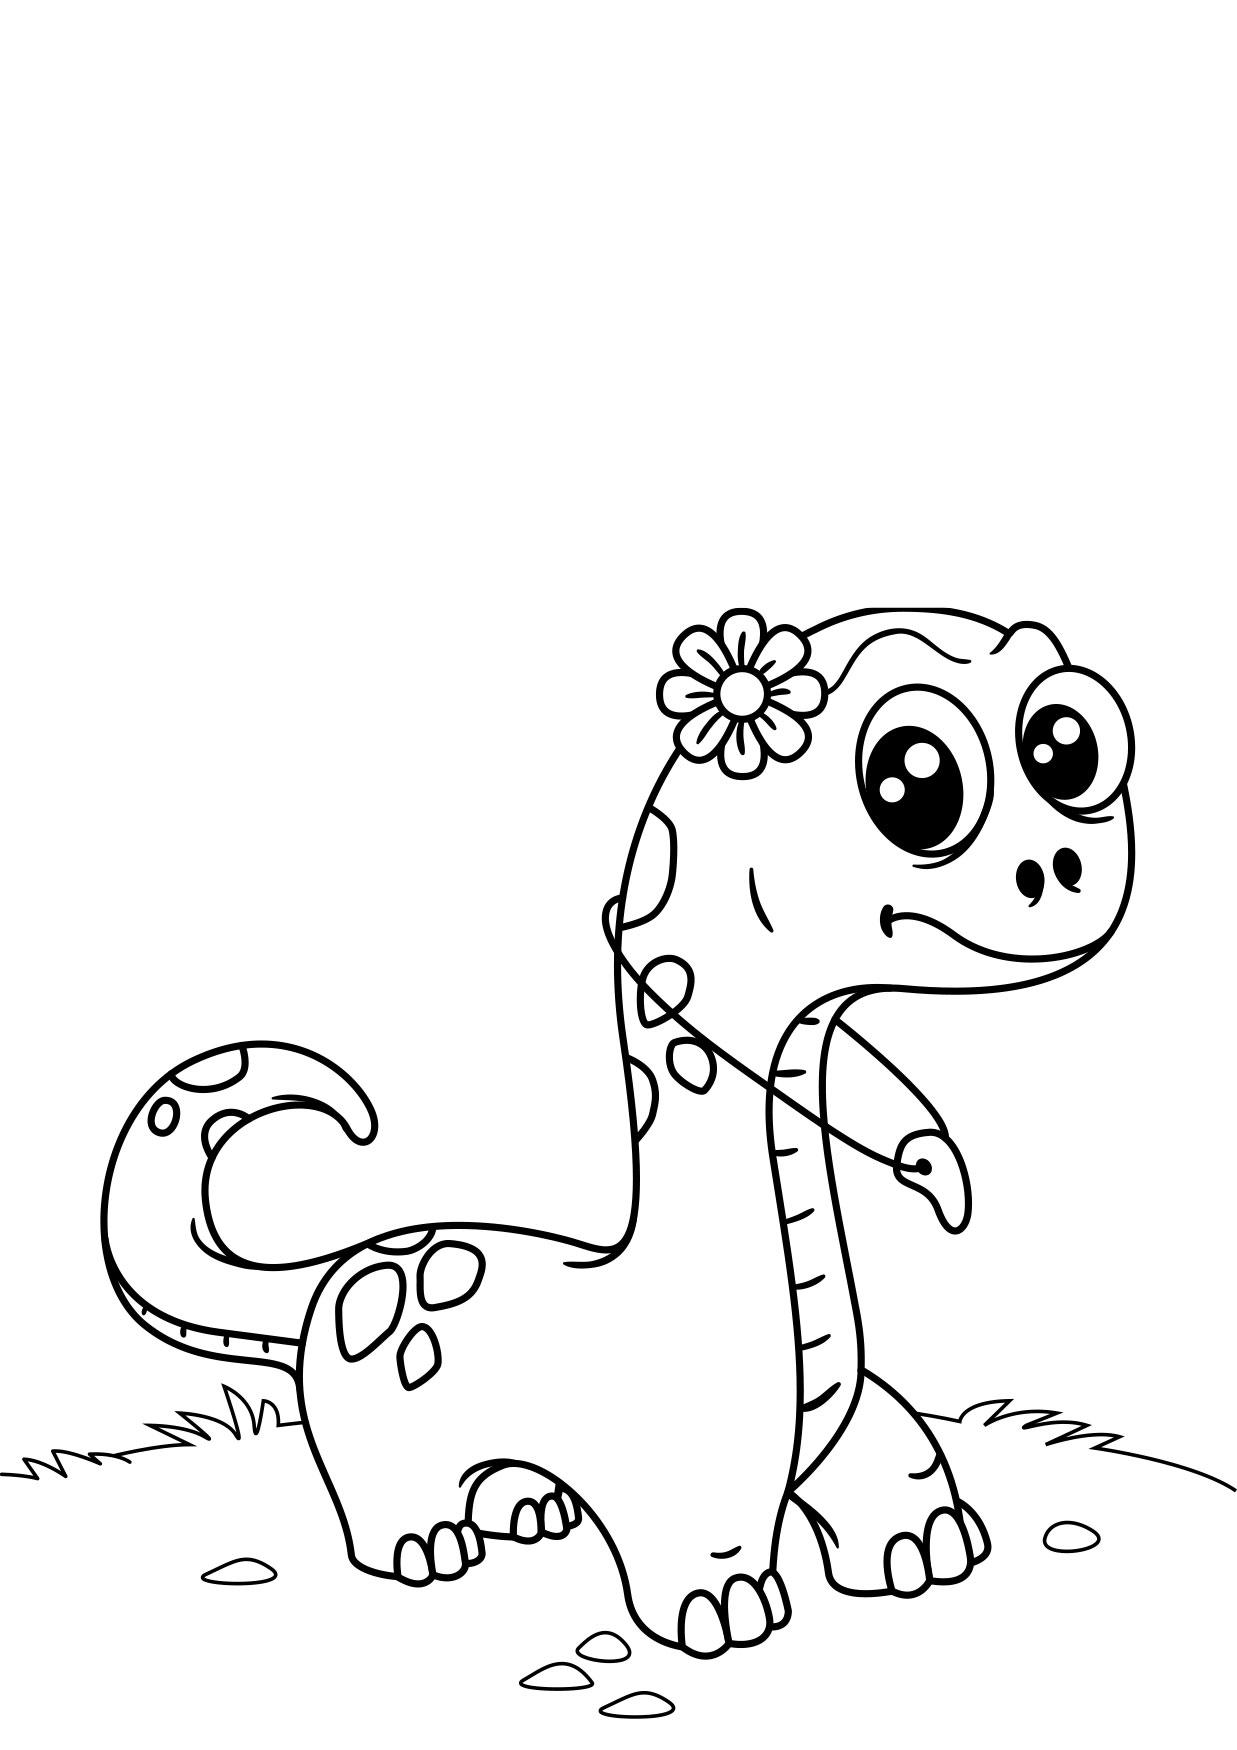 Coloring Page dinosaur with flower   free printable coloring pages ...